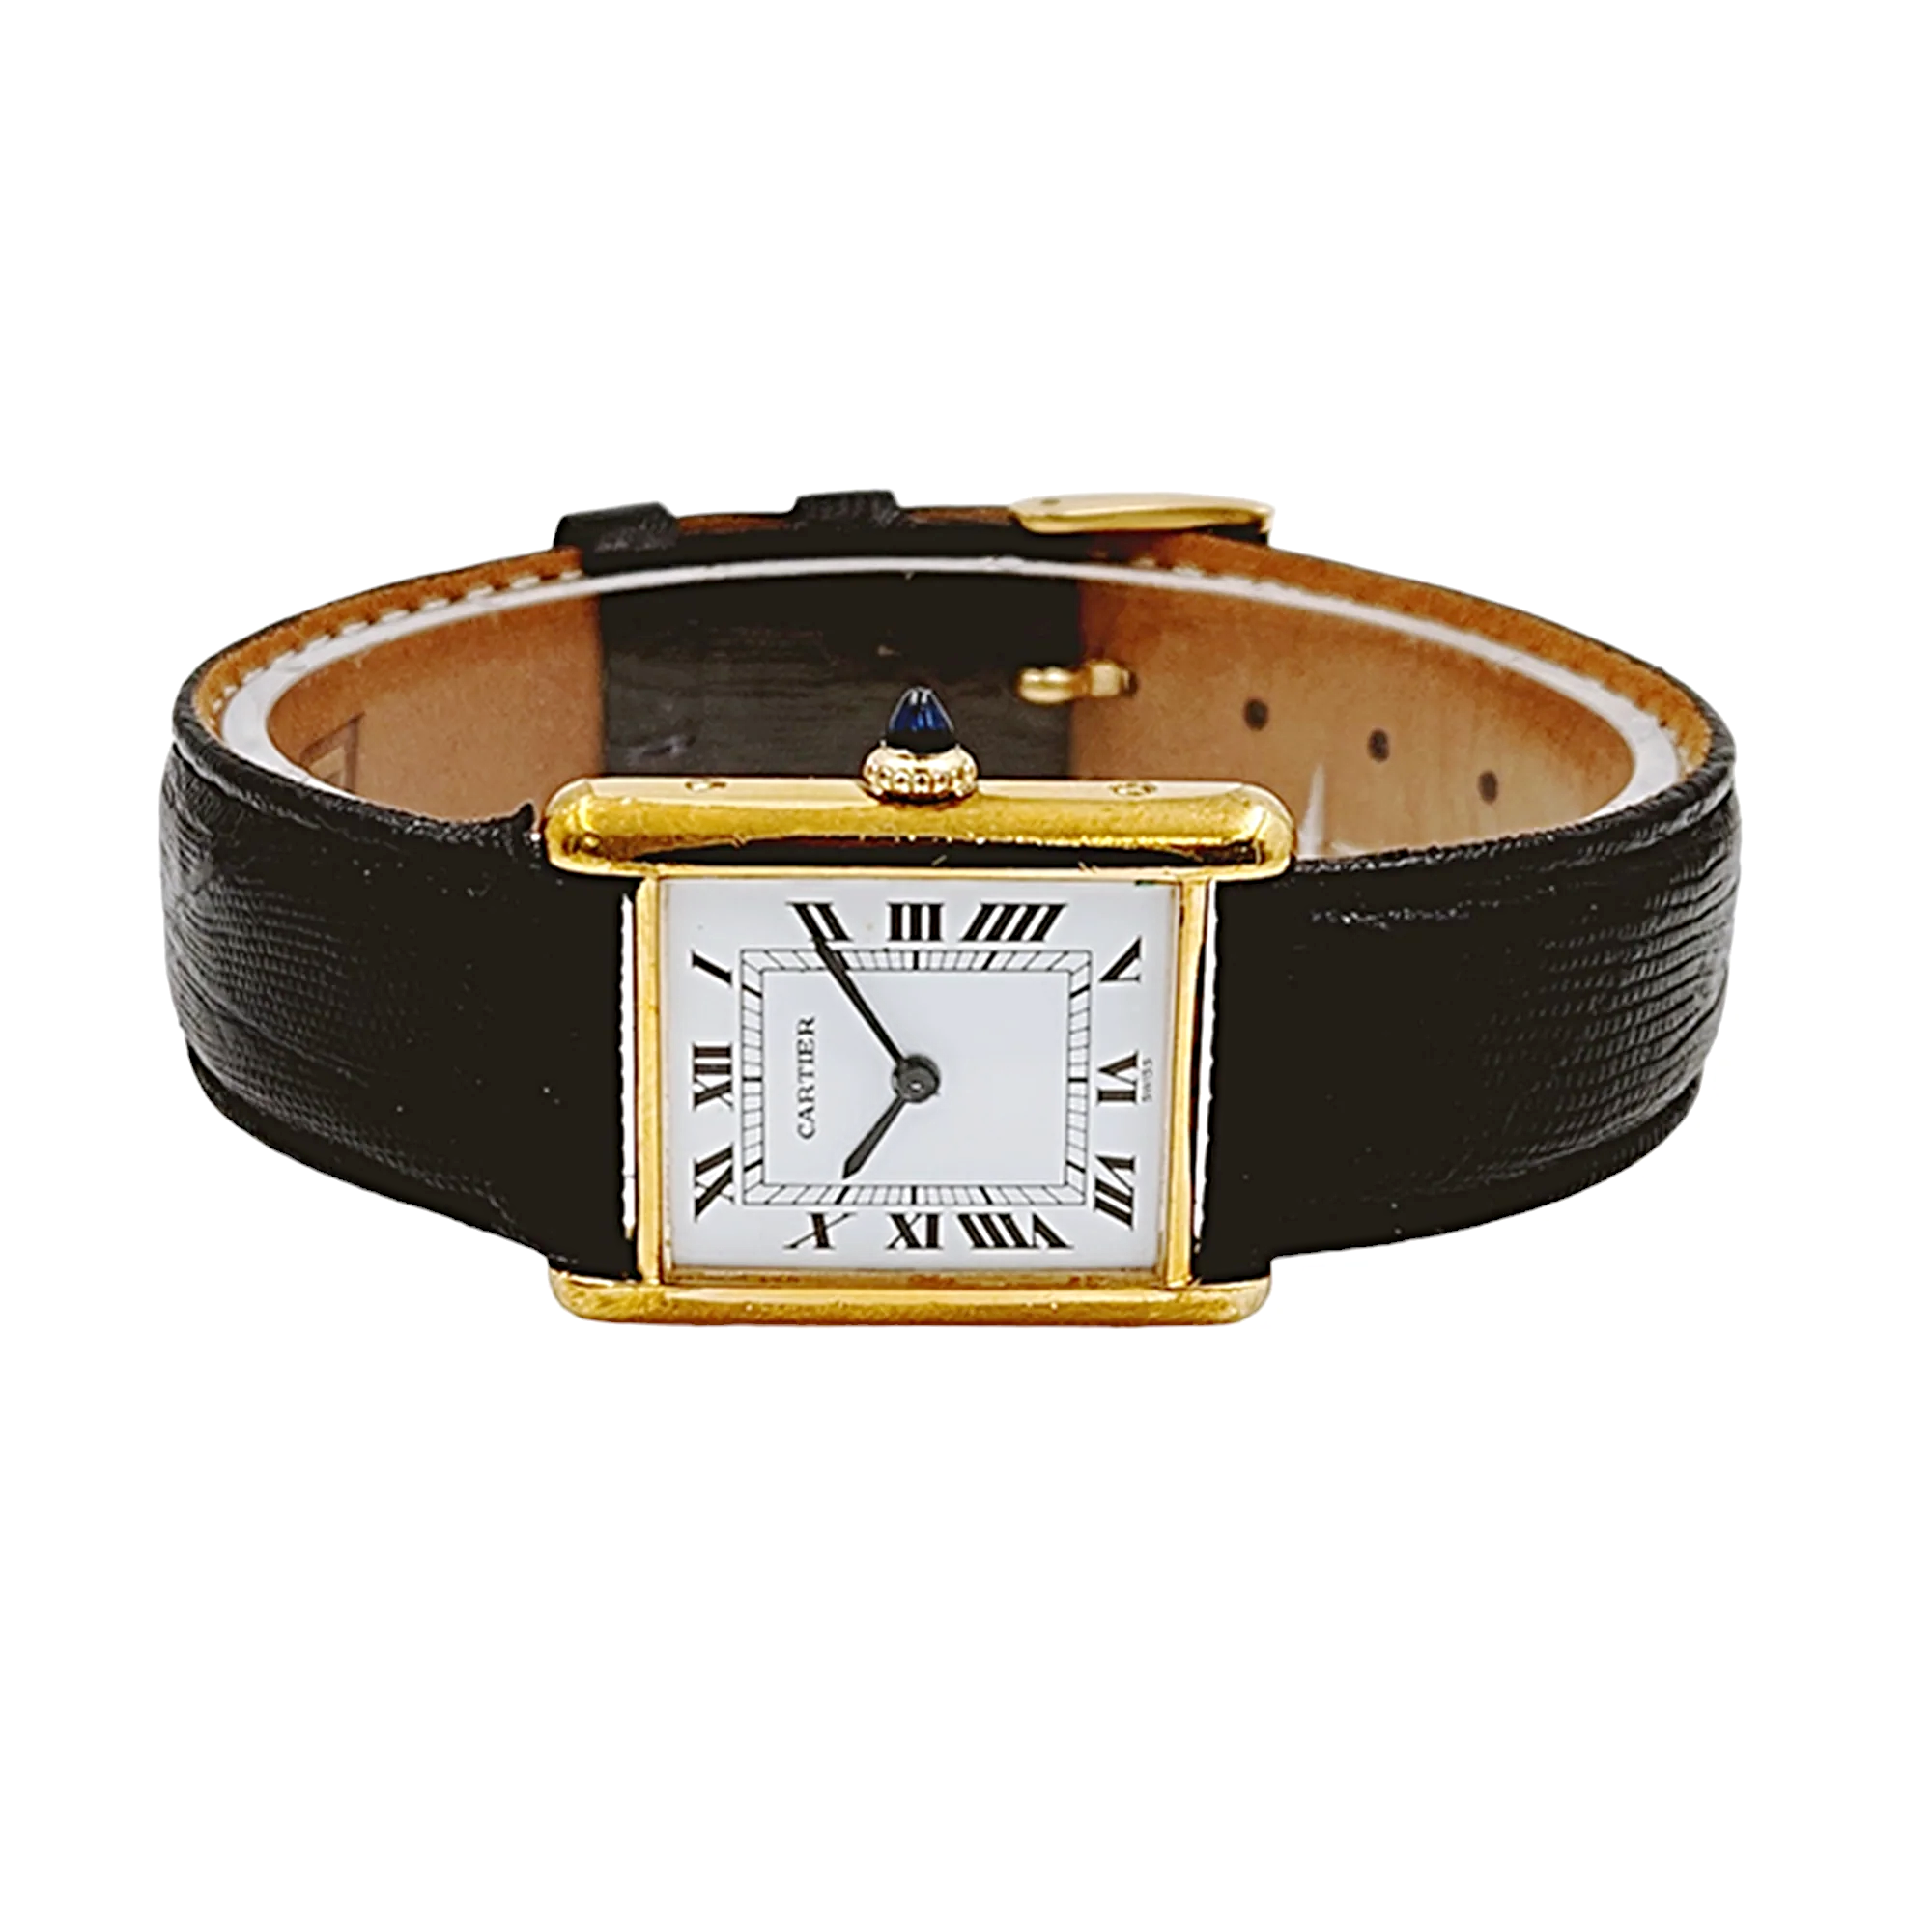 Ladies Cartier Tank Automatic Vintage 18K Electroplated Watch with White Roman Numeral Dial and Black Leather Band. (Pre-Owned)